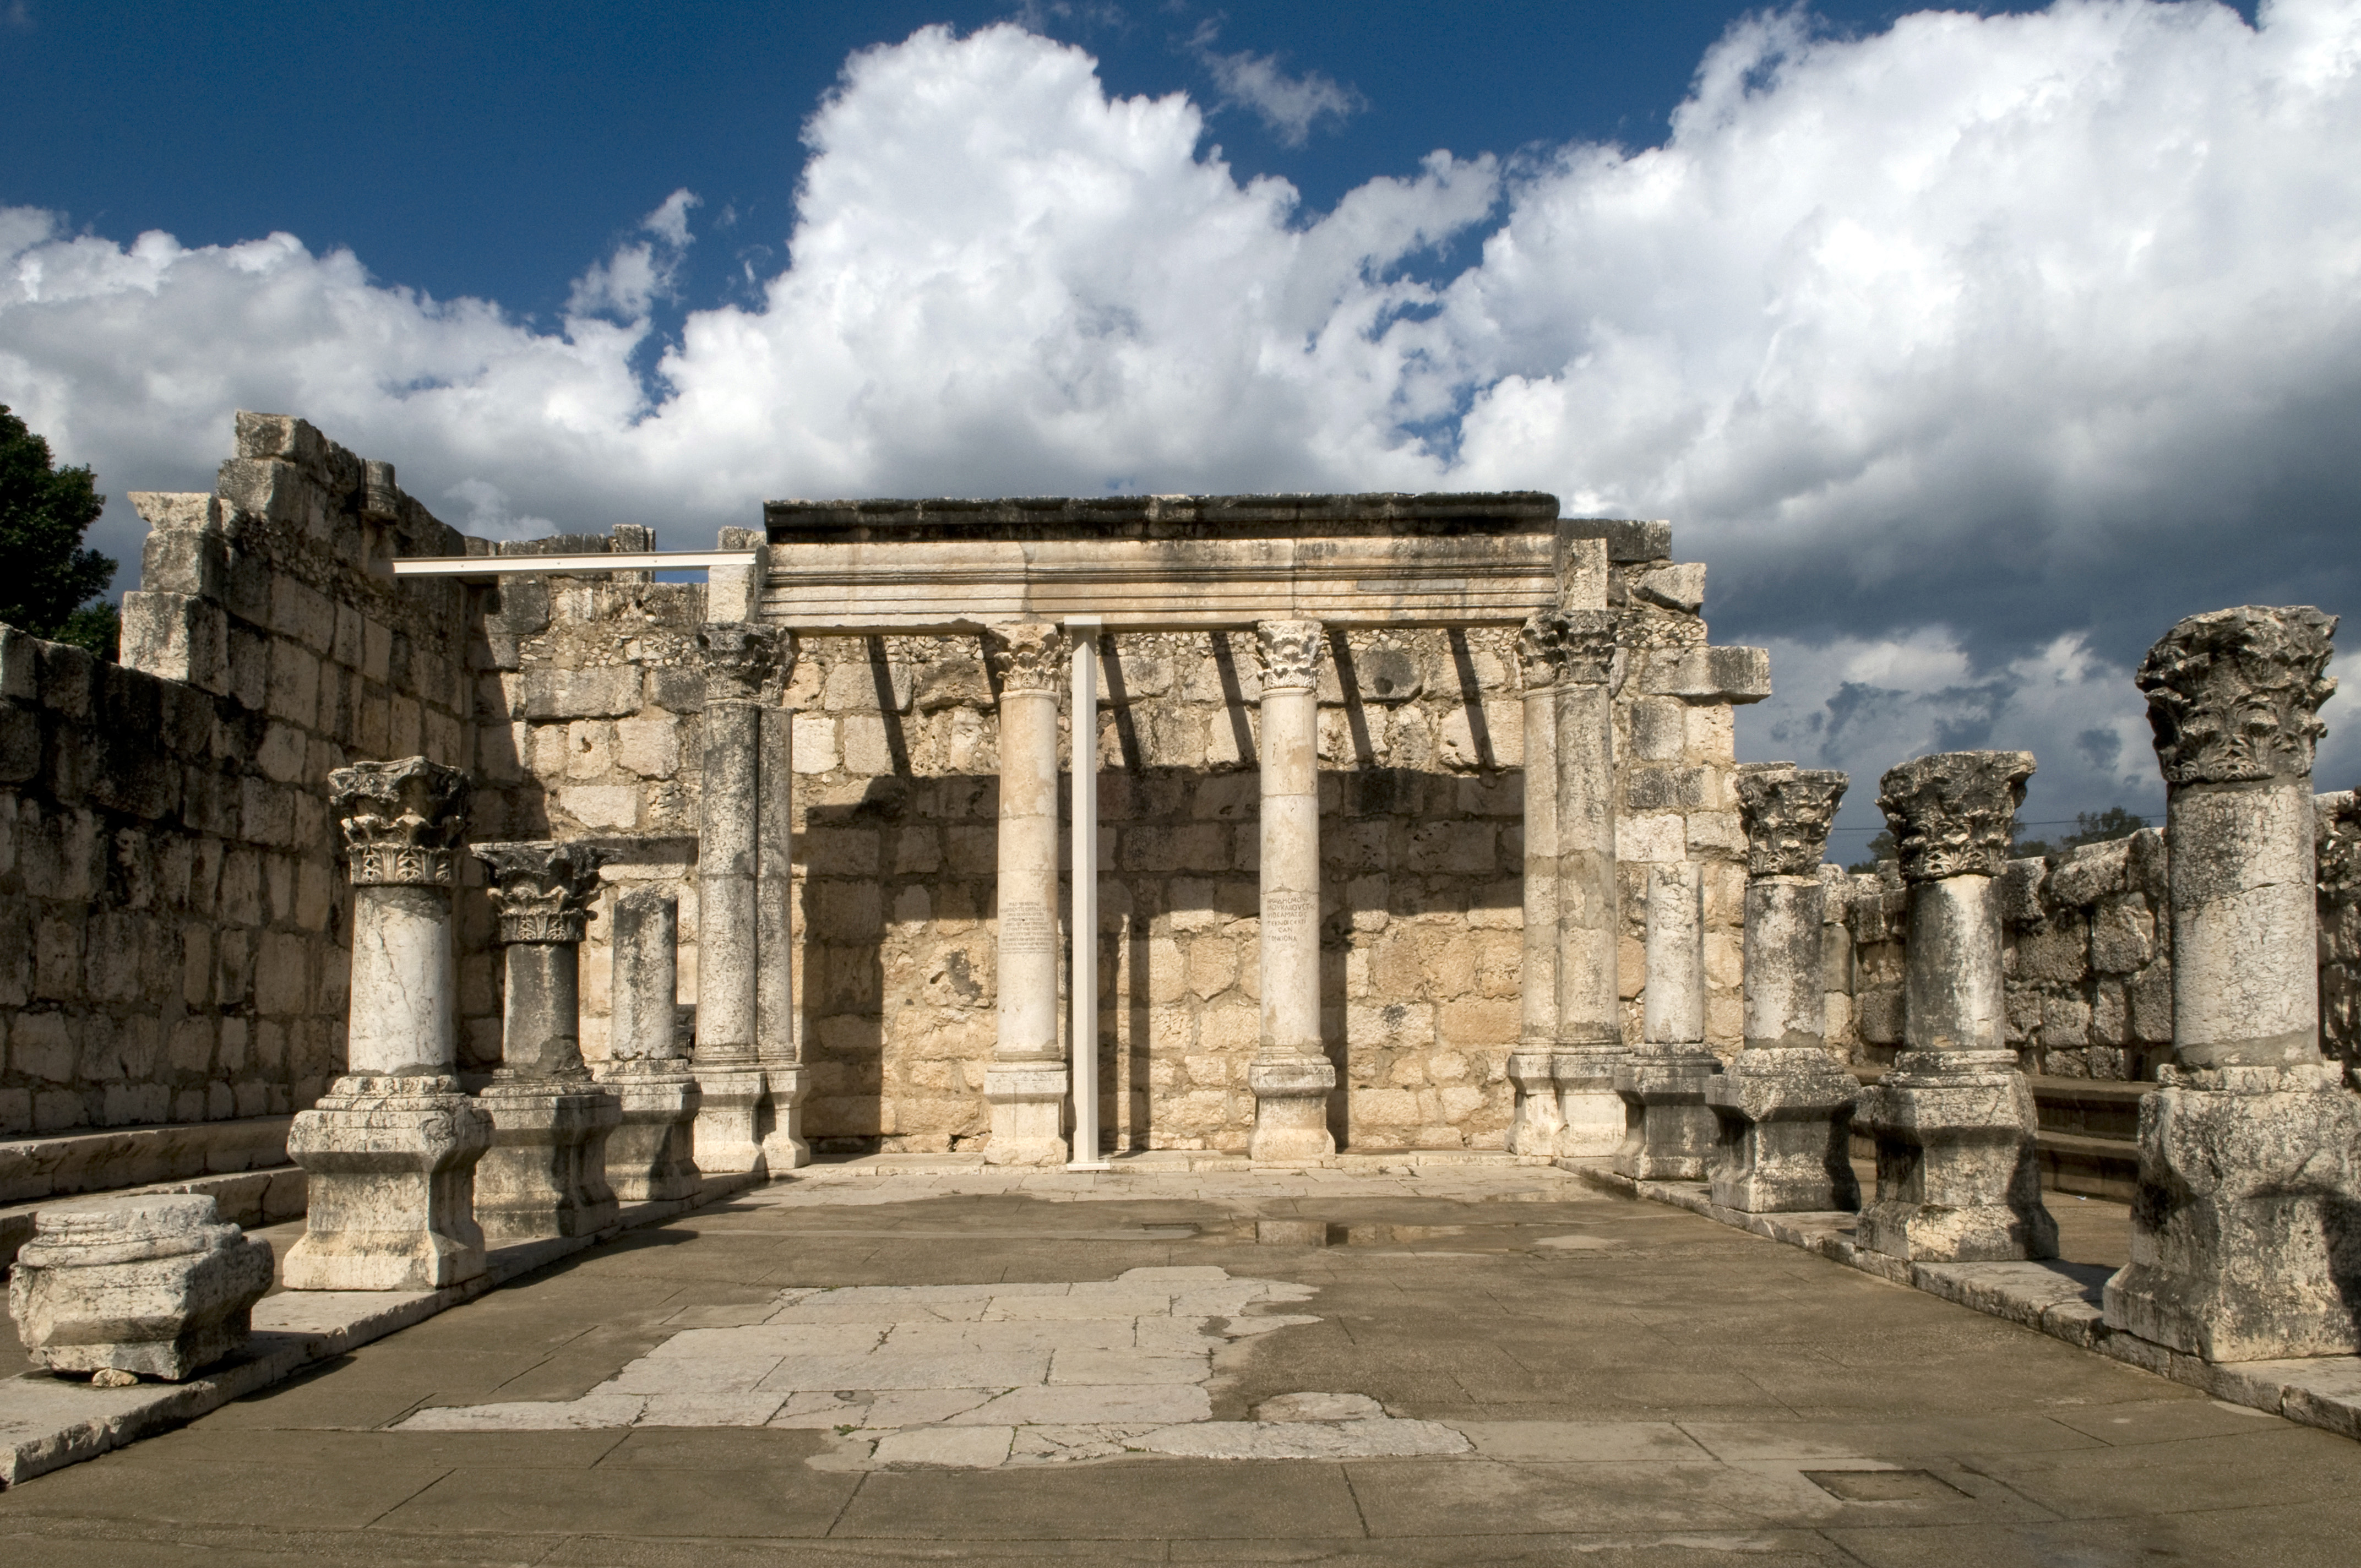 Sites_of_Christianity_in_the_Galillee_-_Ruins_of_the_ancient_Great_Synagogue_at_Capernaum_(or_Kfar_Nahum)_on_the_shore_of_the_Lake_of_Galilee,_Northern_Israel.jpg